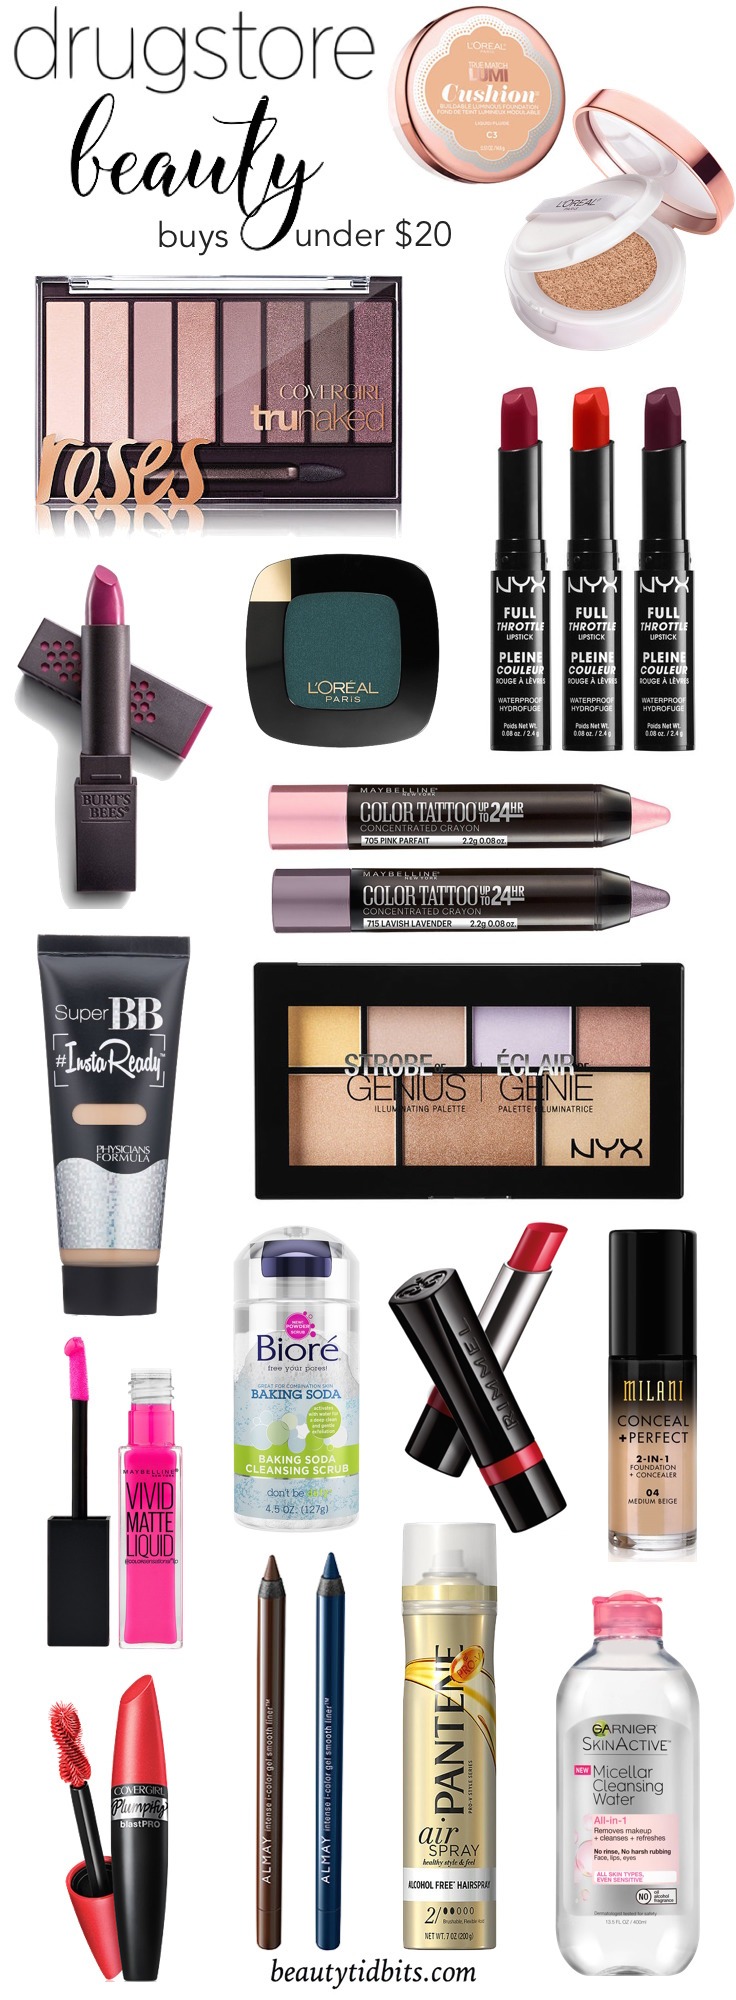 Amp up your look for the new year with these exciting new drugstore beauty products - all under $20! 